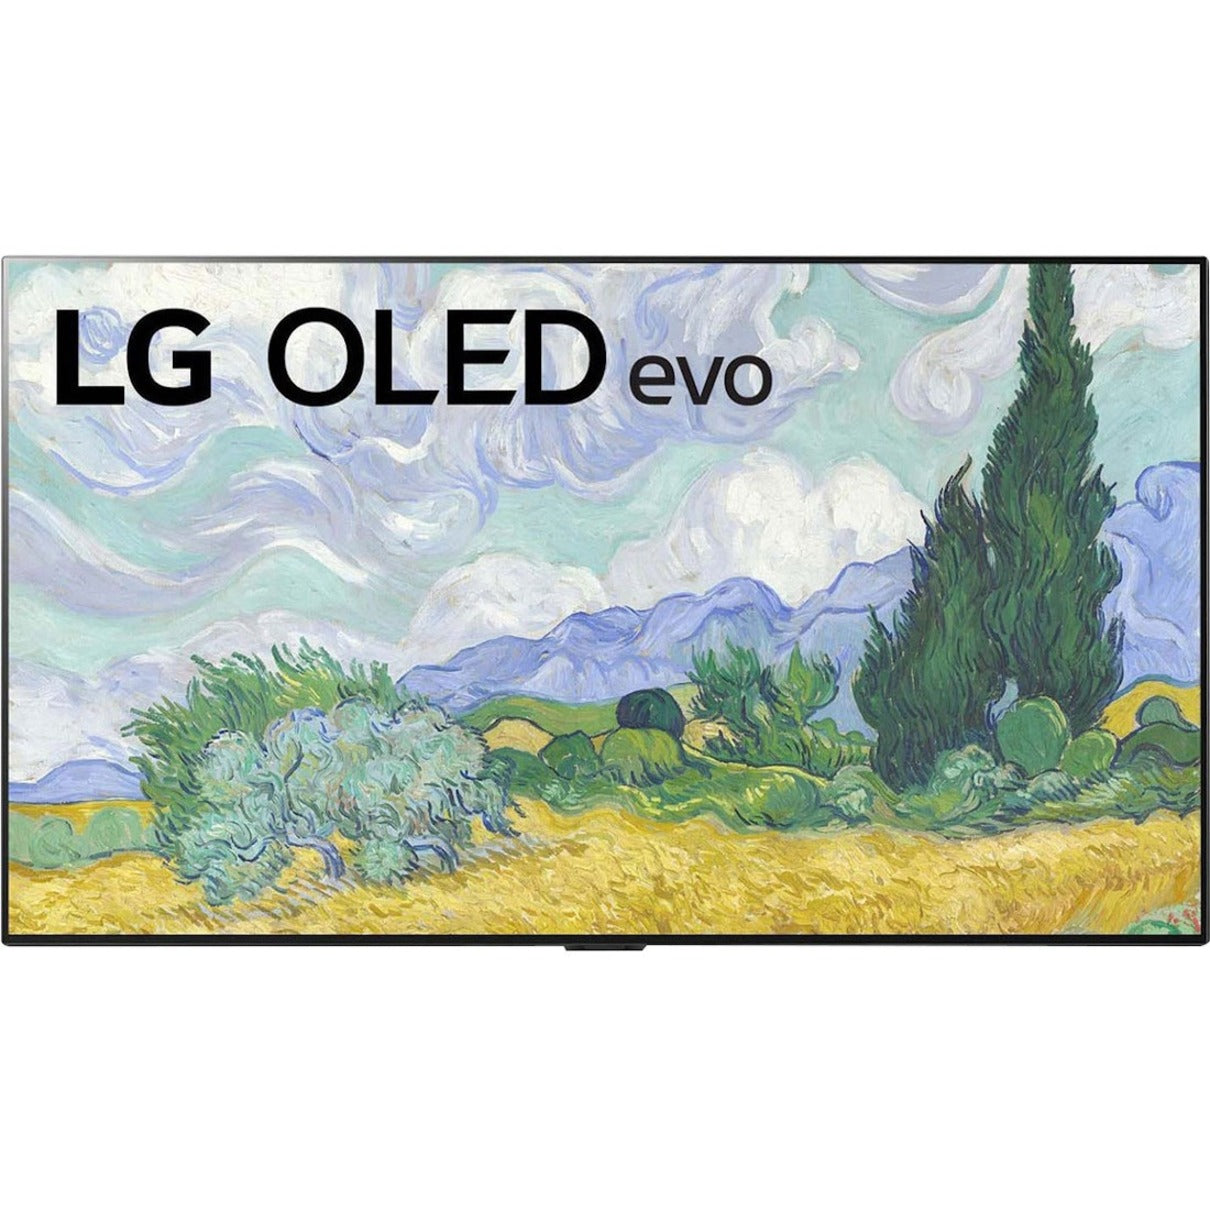 LG OLED55G1PUA Smart OLED TV 4K UHDTV, 54.6" - Dolby Atmos, 120Hz Refresh Rate, WebOS, Voice Assistant Supported